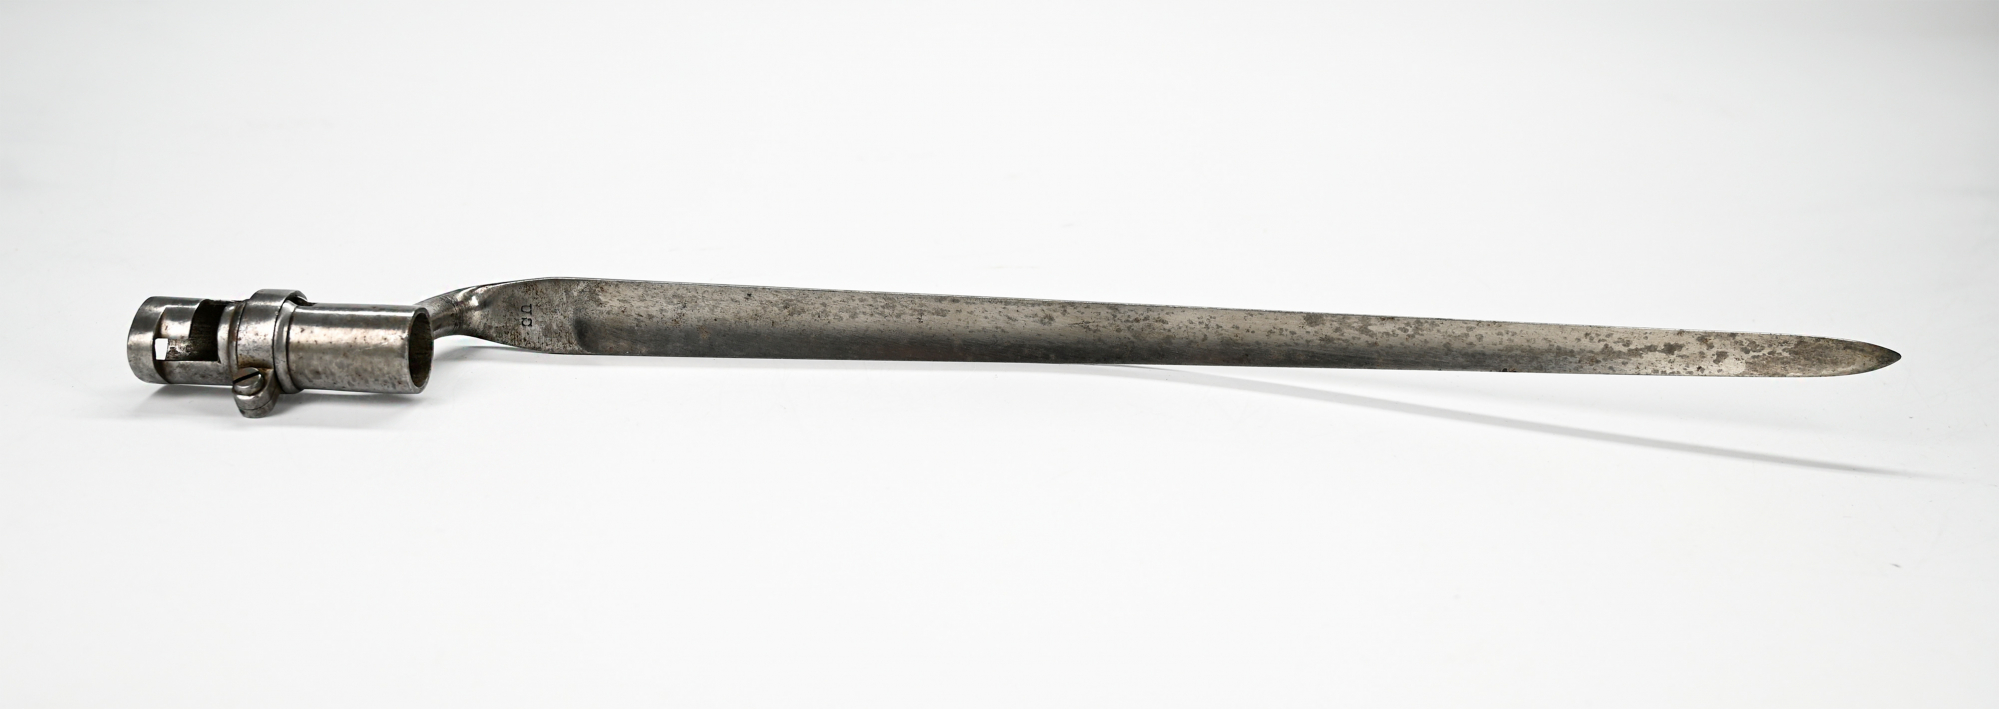 VERY GOOD EXAMPLE OF THE SCARCE M1851 CADET MUSKET BAYONET